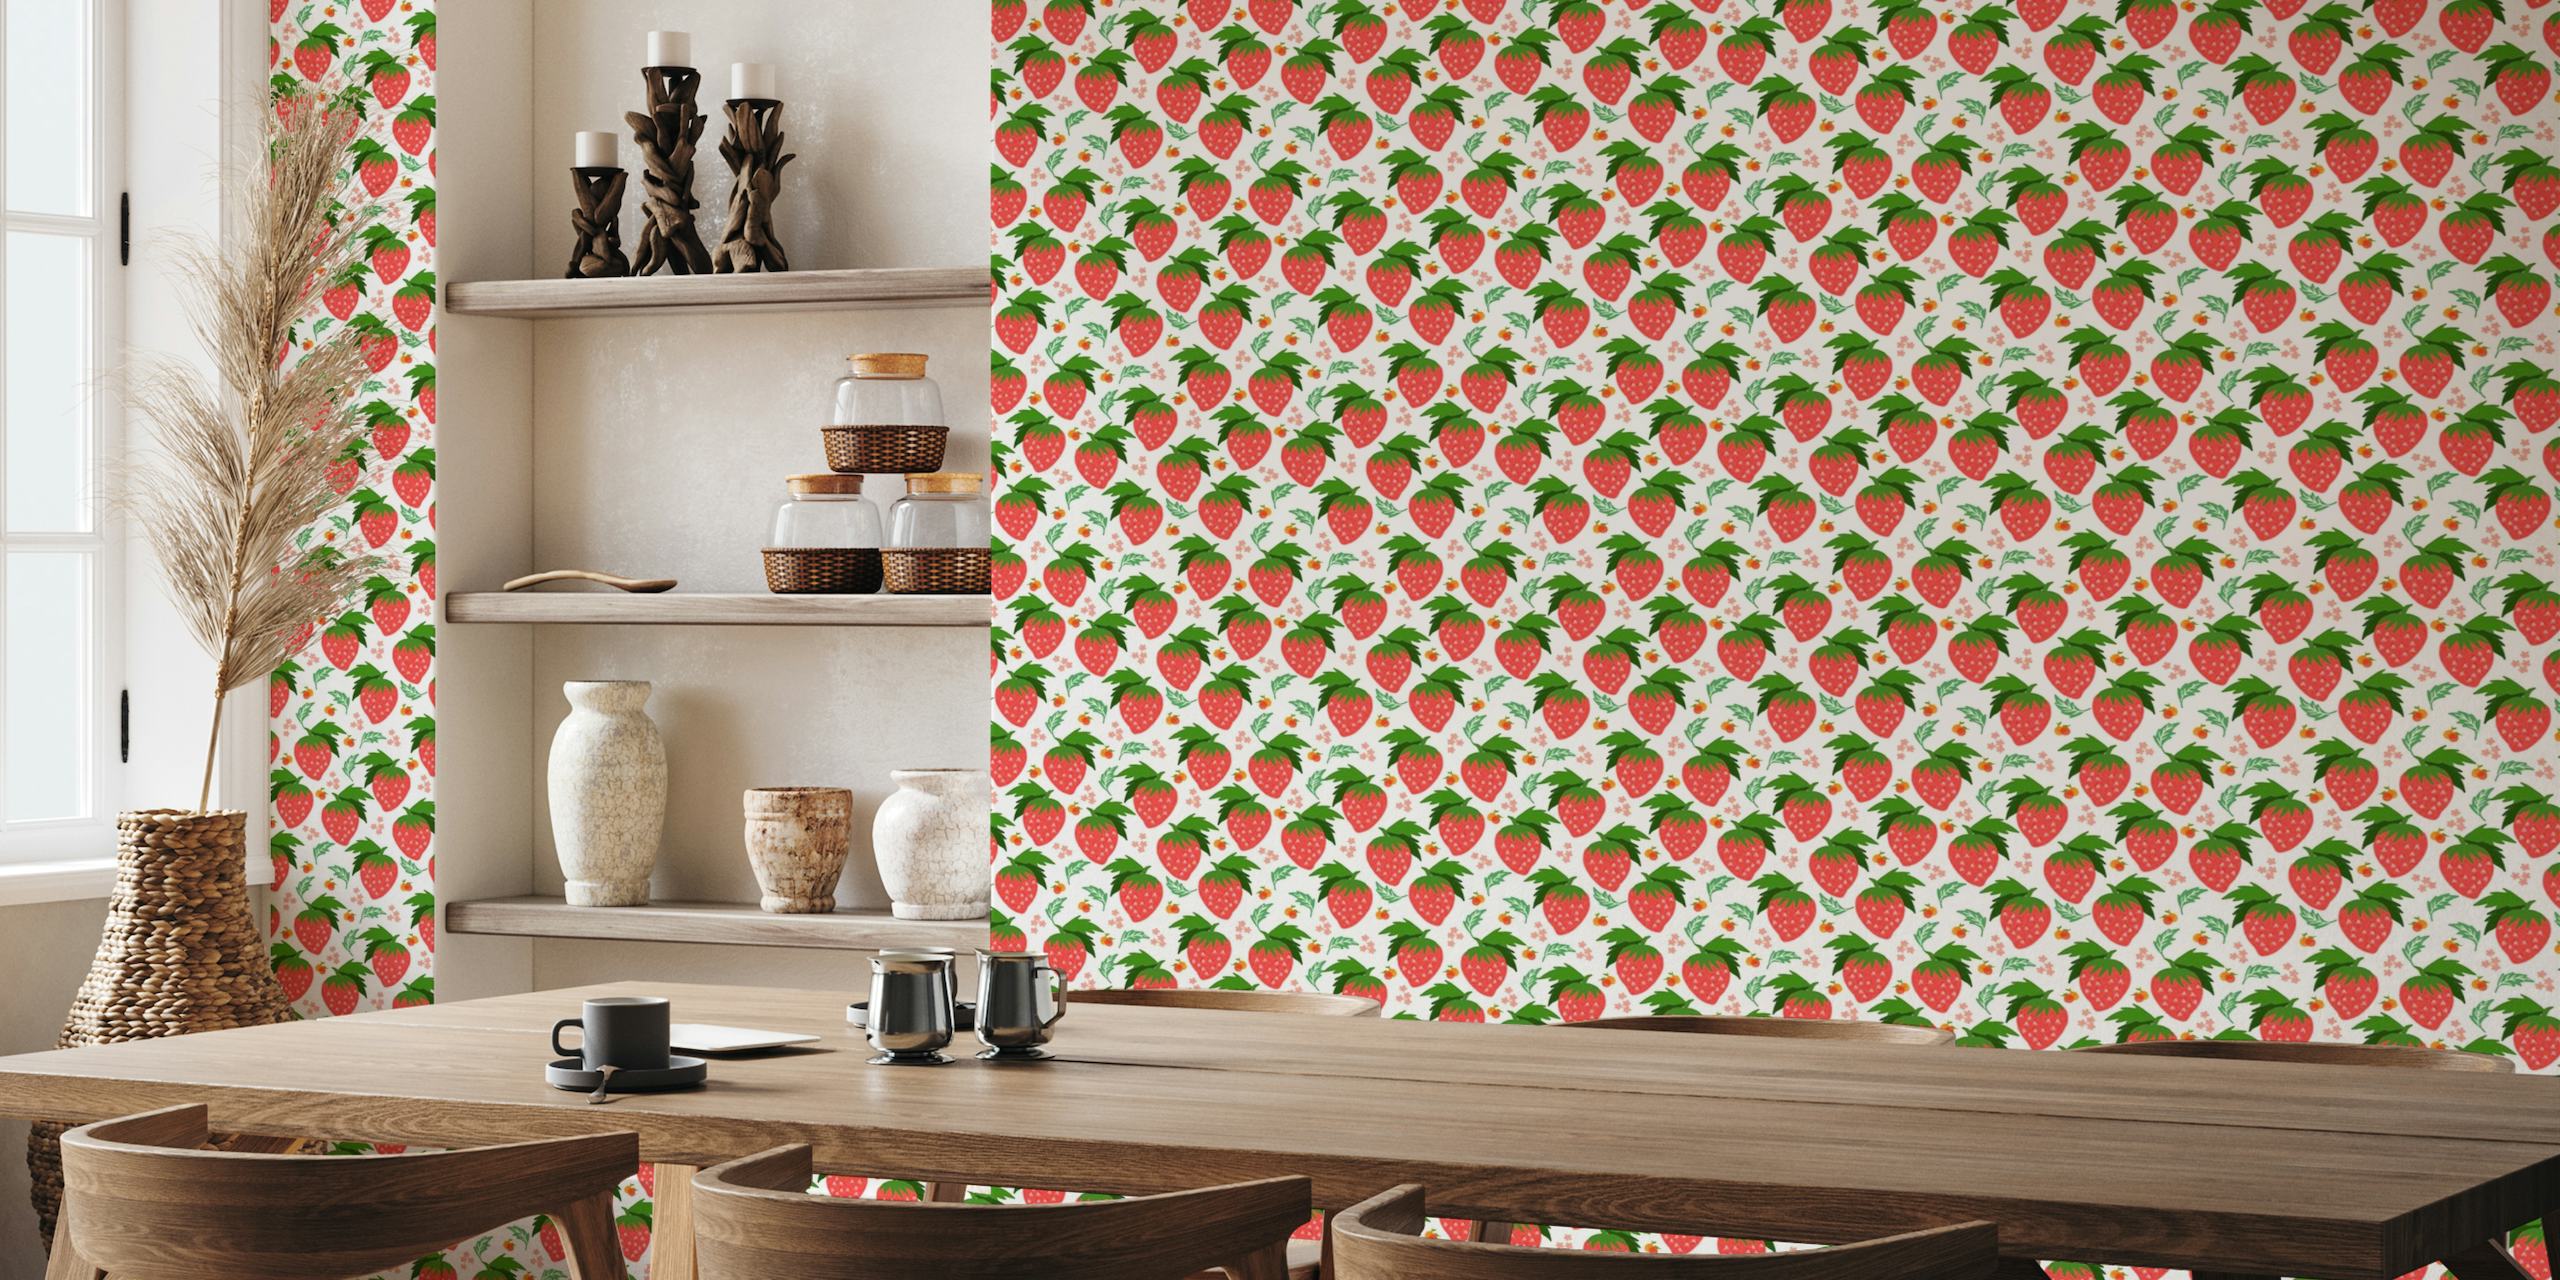 Strawberries fruit tropical pattern on a white background ταπετσαρία